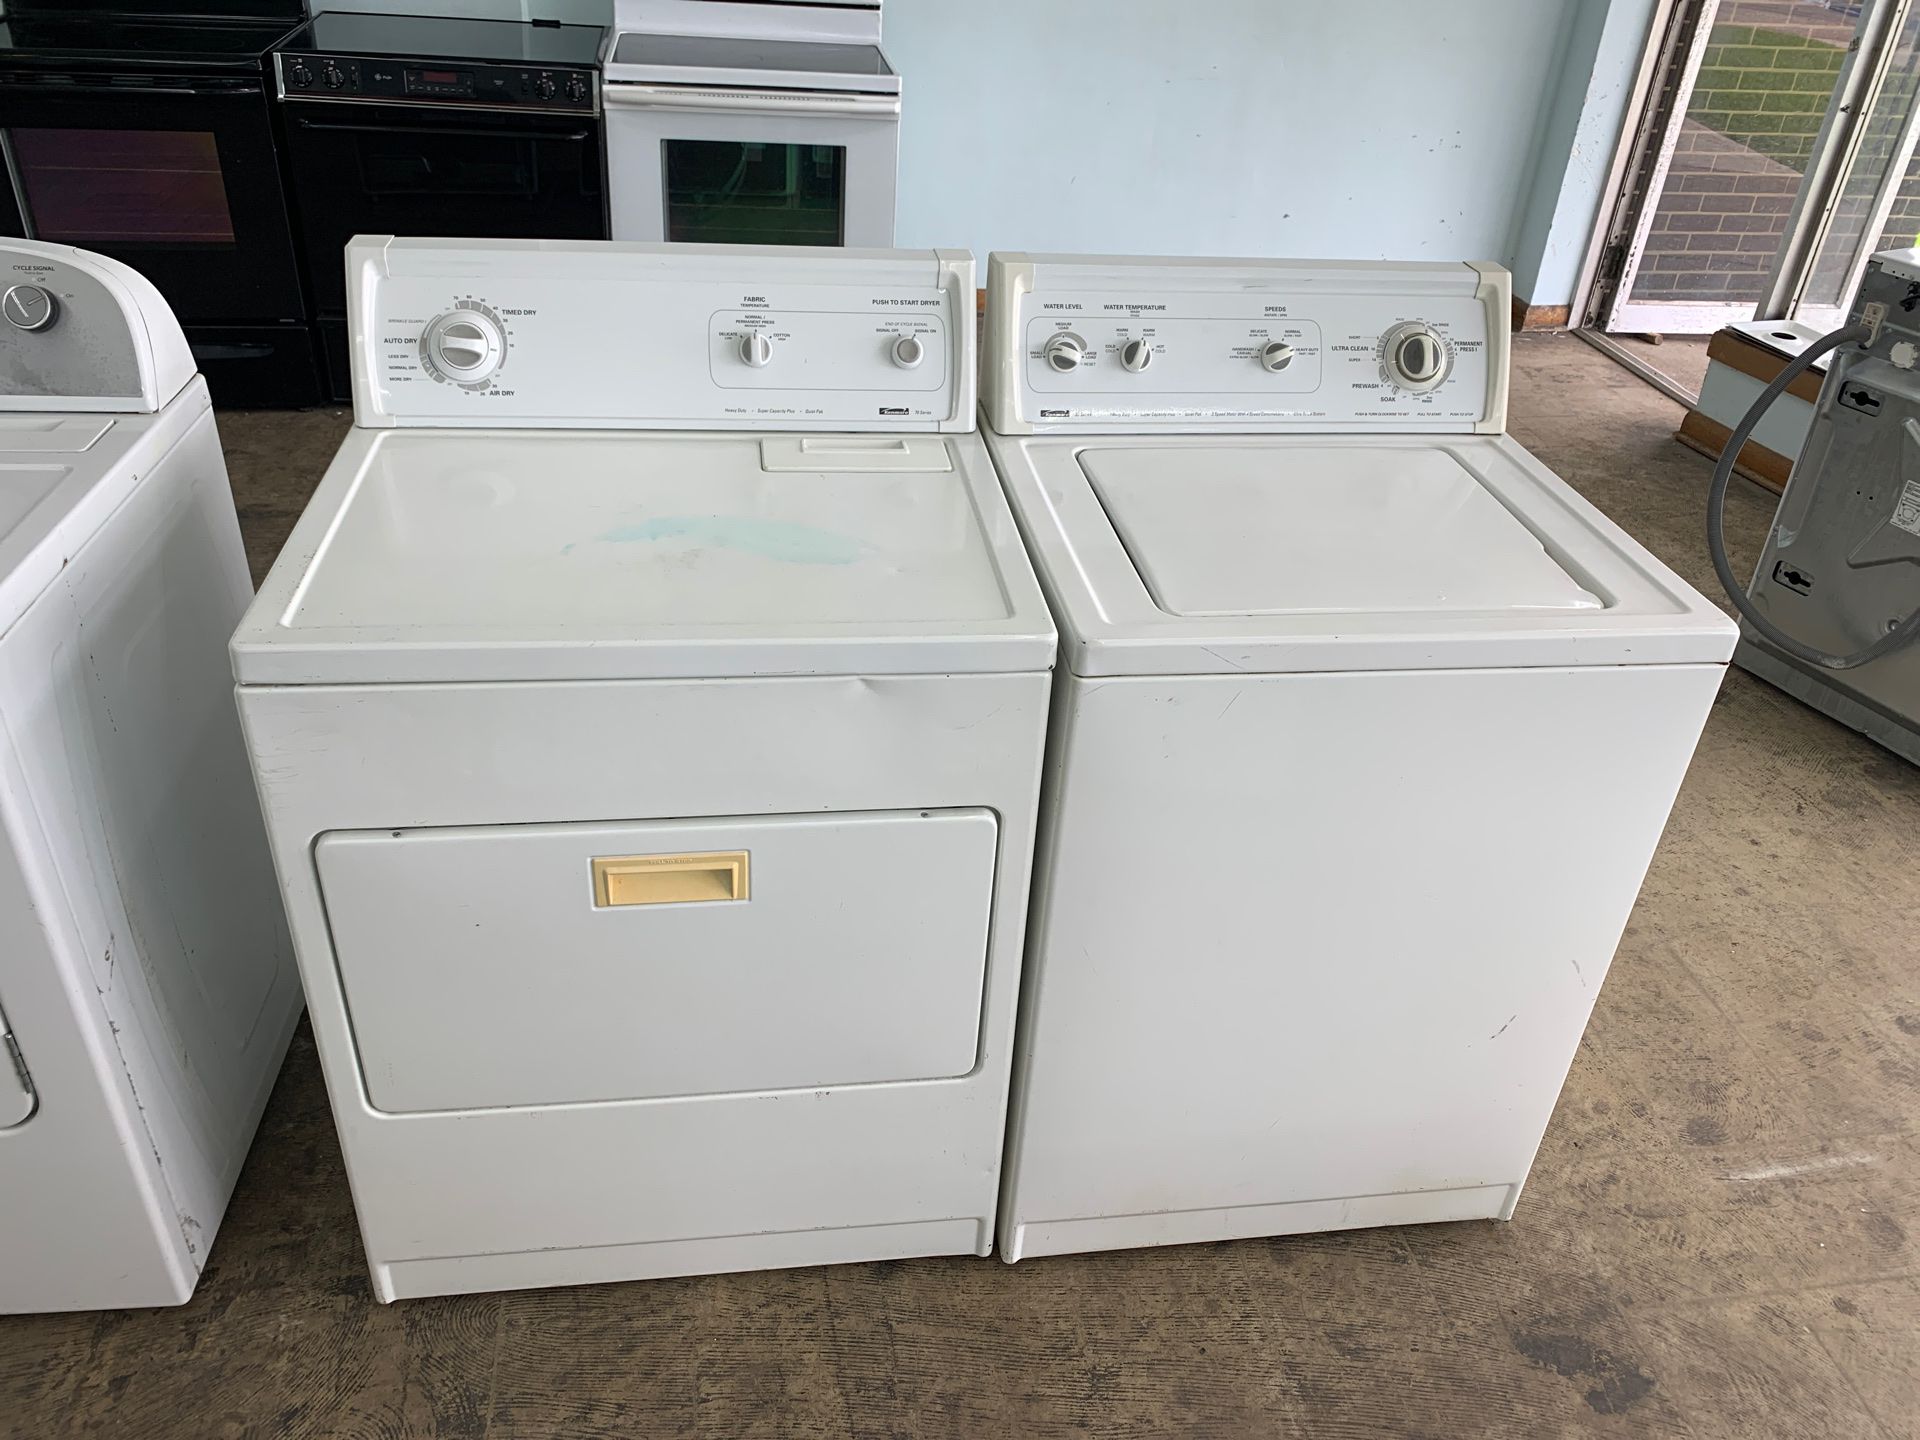 Kenmore standard washer and Electric dryer set